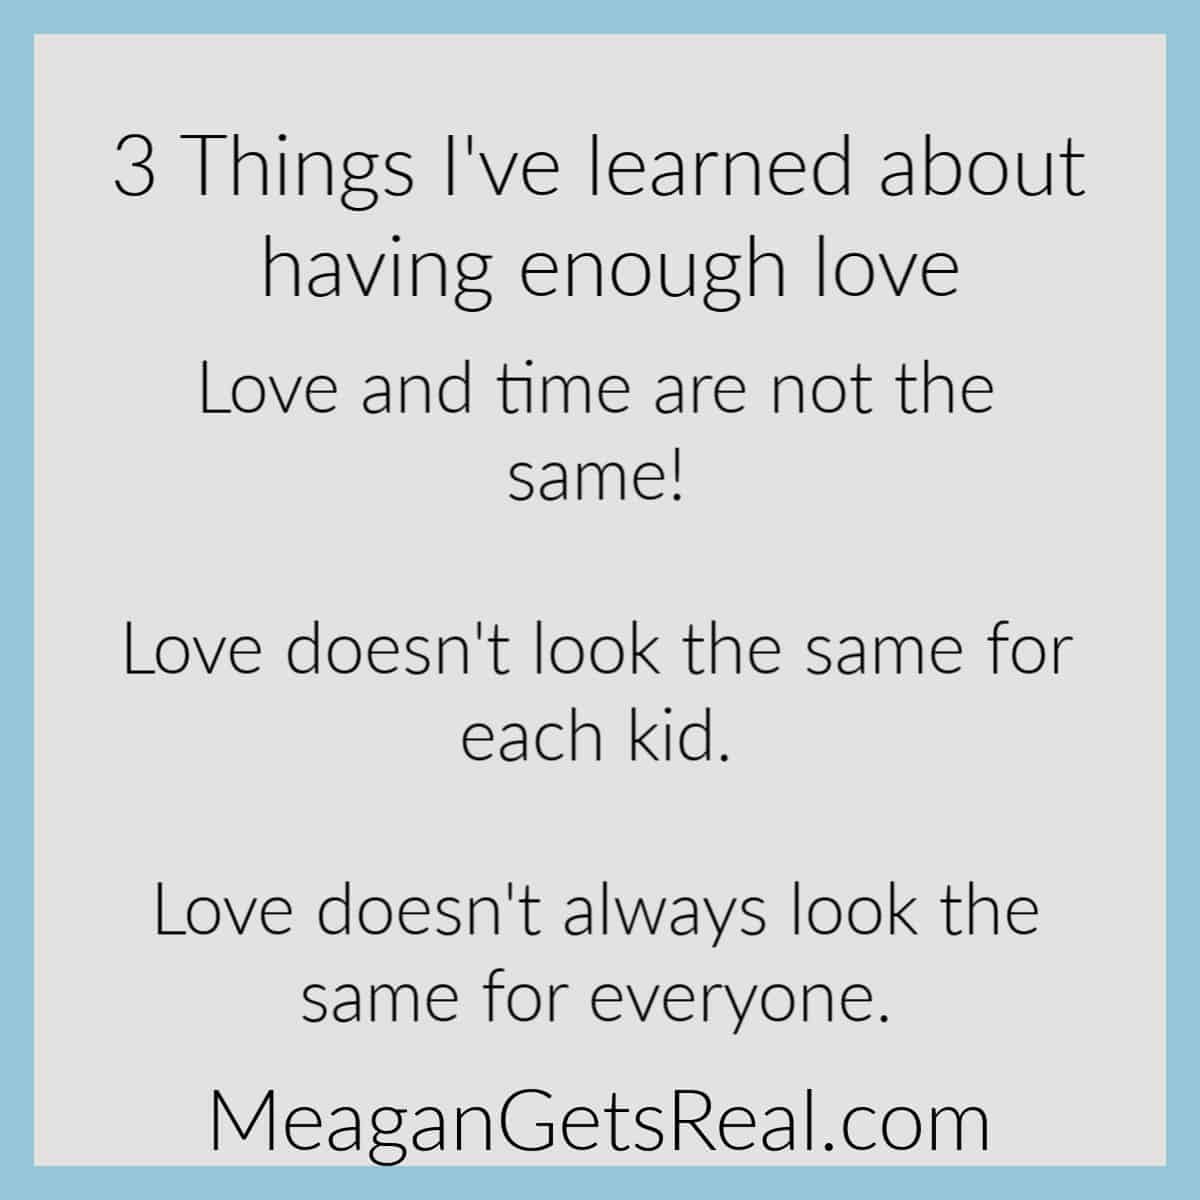 3 Things I've learned about having enough education love. Support for moms doesn't have to be hard to find with this comprehensive guide filled with parenting resources for moms you won't want to miss.